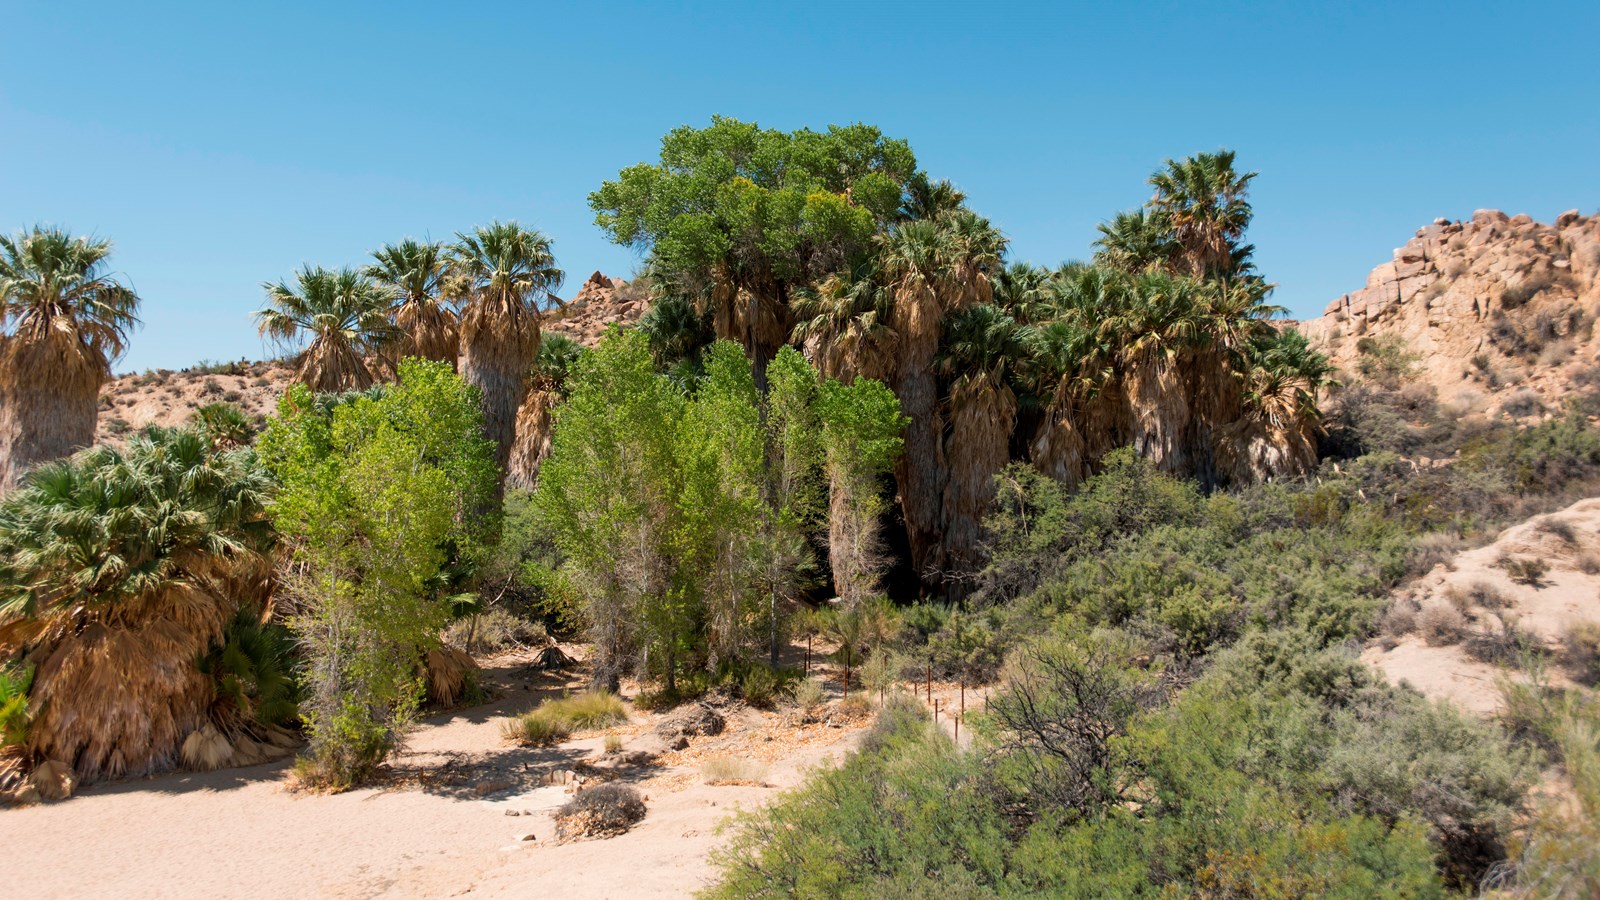 A lush desert oasis filled with desert palms, short trees, and shrubs in front of a rocky hill.